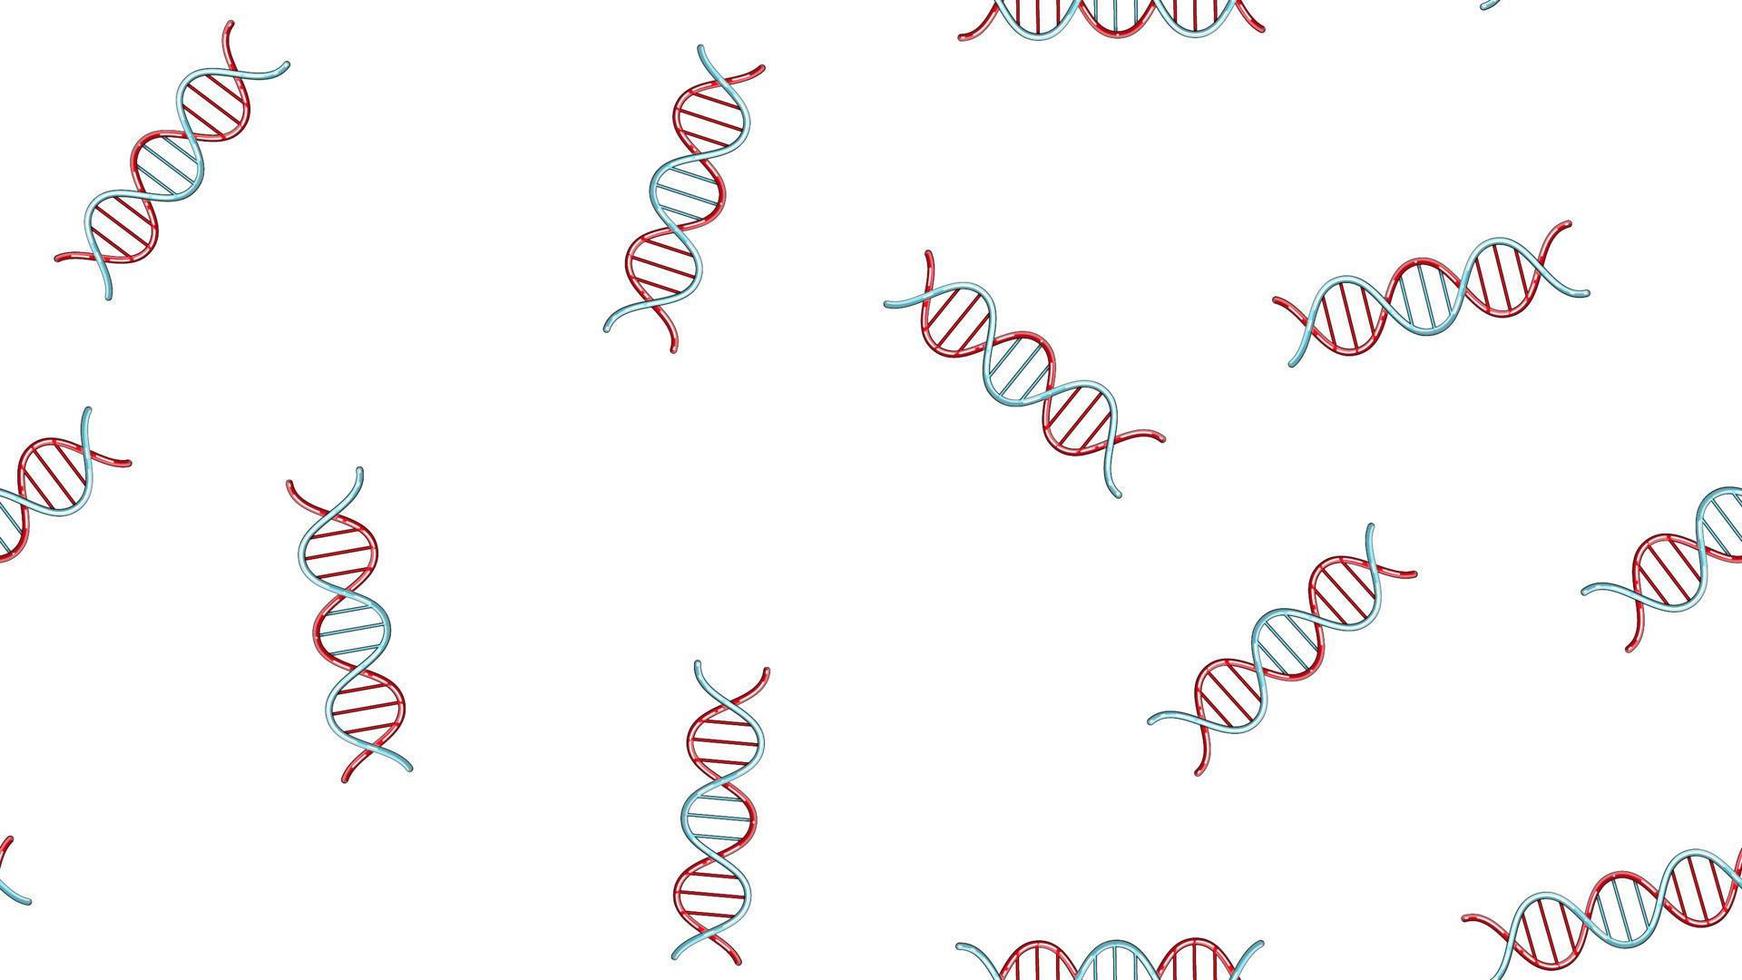 Seamless pattern texture of endless repetitive medical scientific abstract structures of dna gene molecules models on white background. Vector illustration